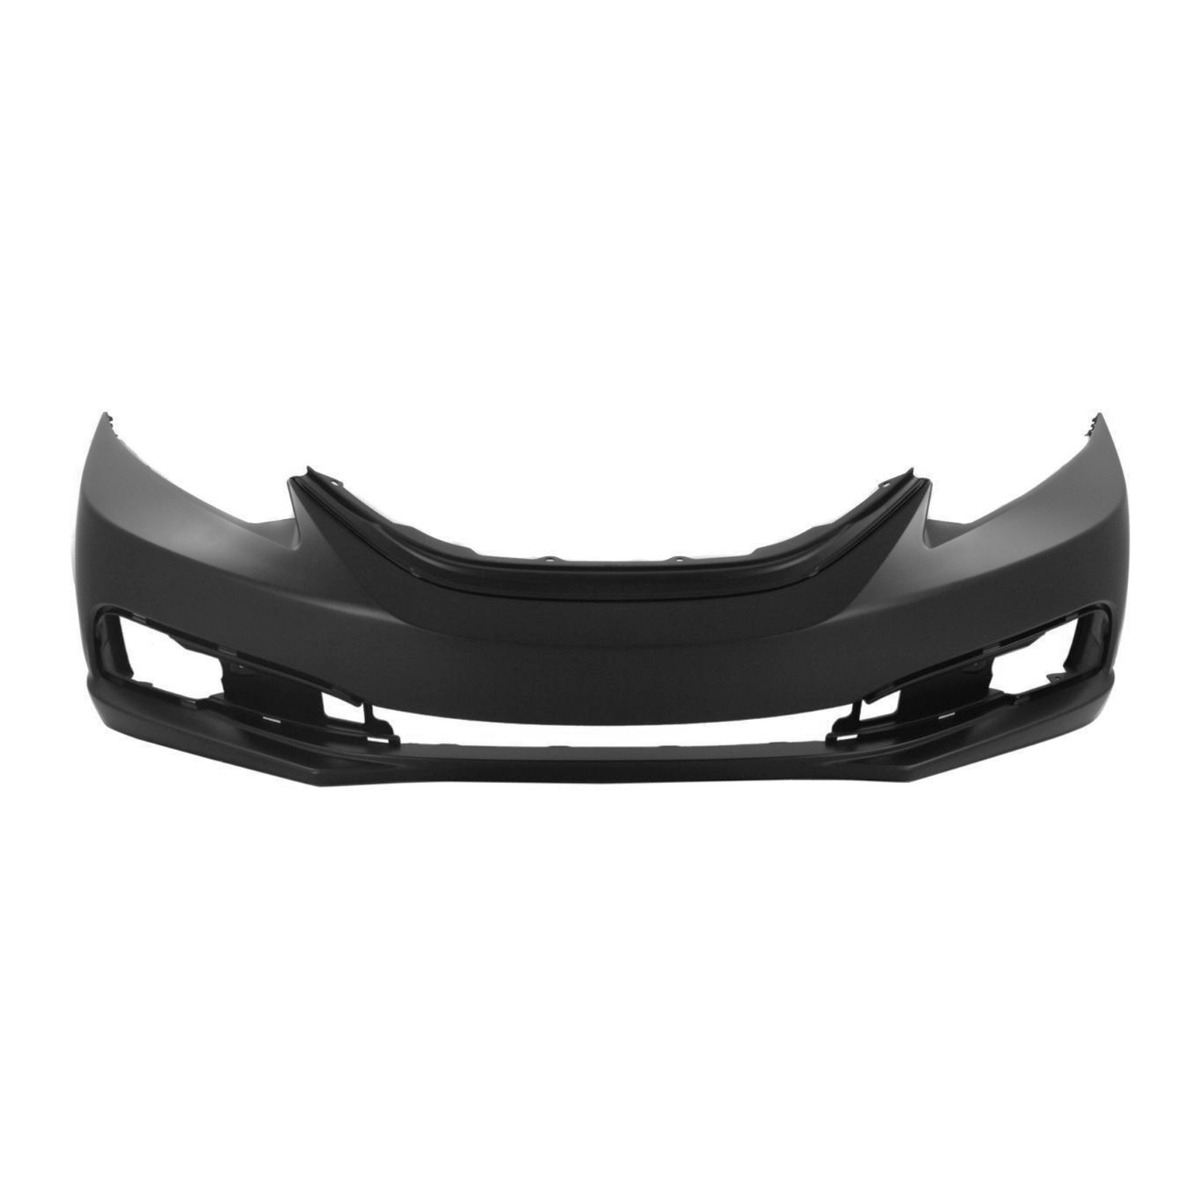 NEW PRIMED FRONT BUMPER COVER FOR 13-15 CIVIC SEDAN HO1000290 SHIPS TODAY